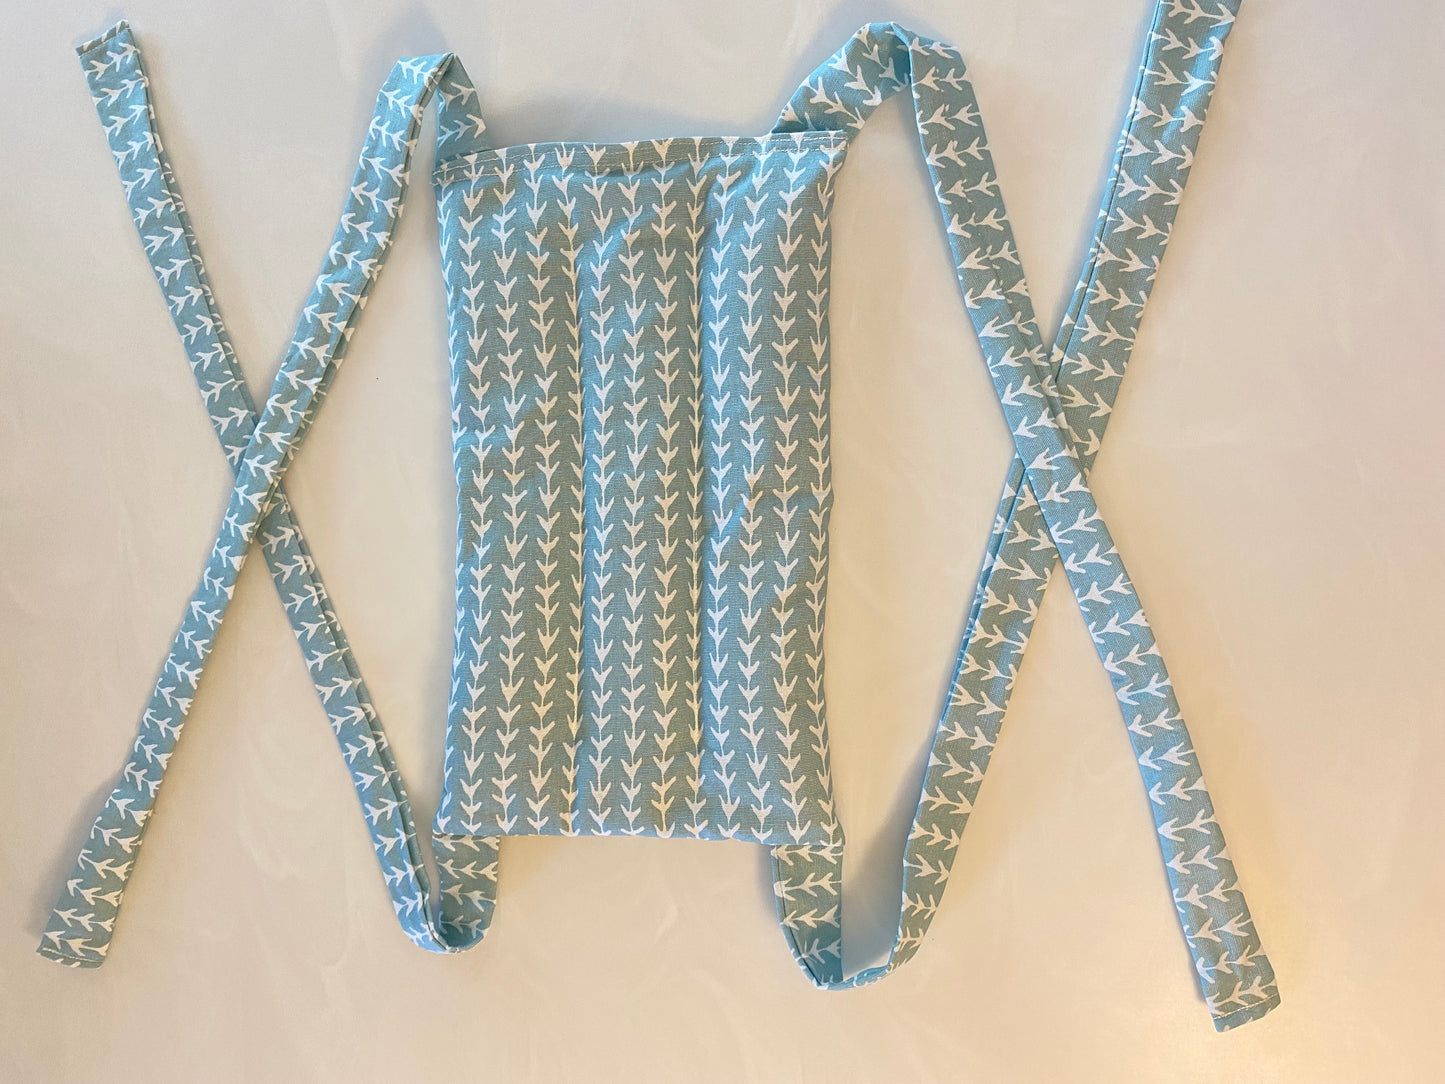 Teal White Arrows Large Microwavable Rice Bag with Ties for Hands Free Use